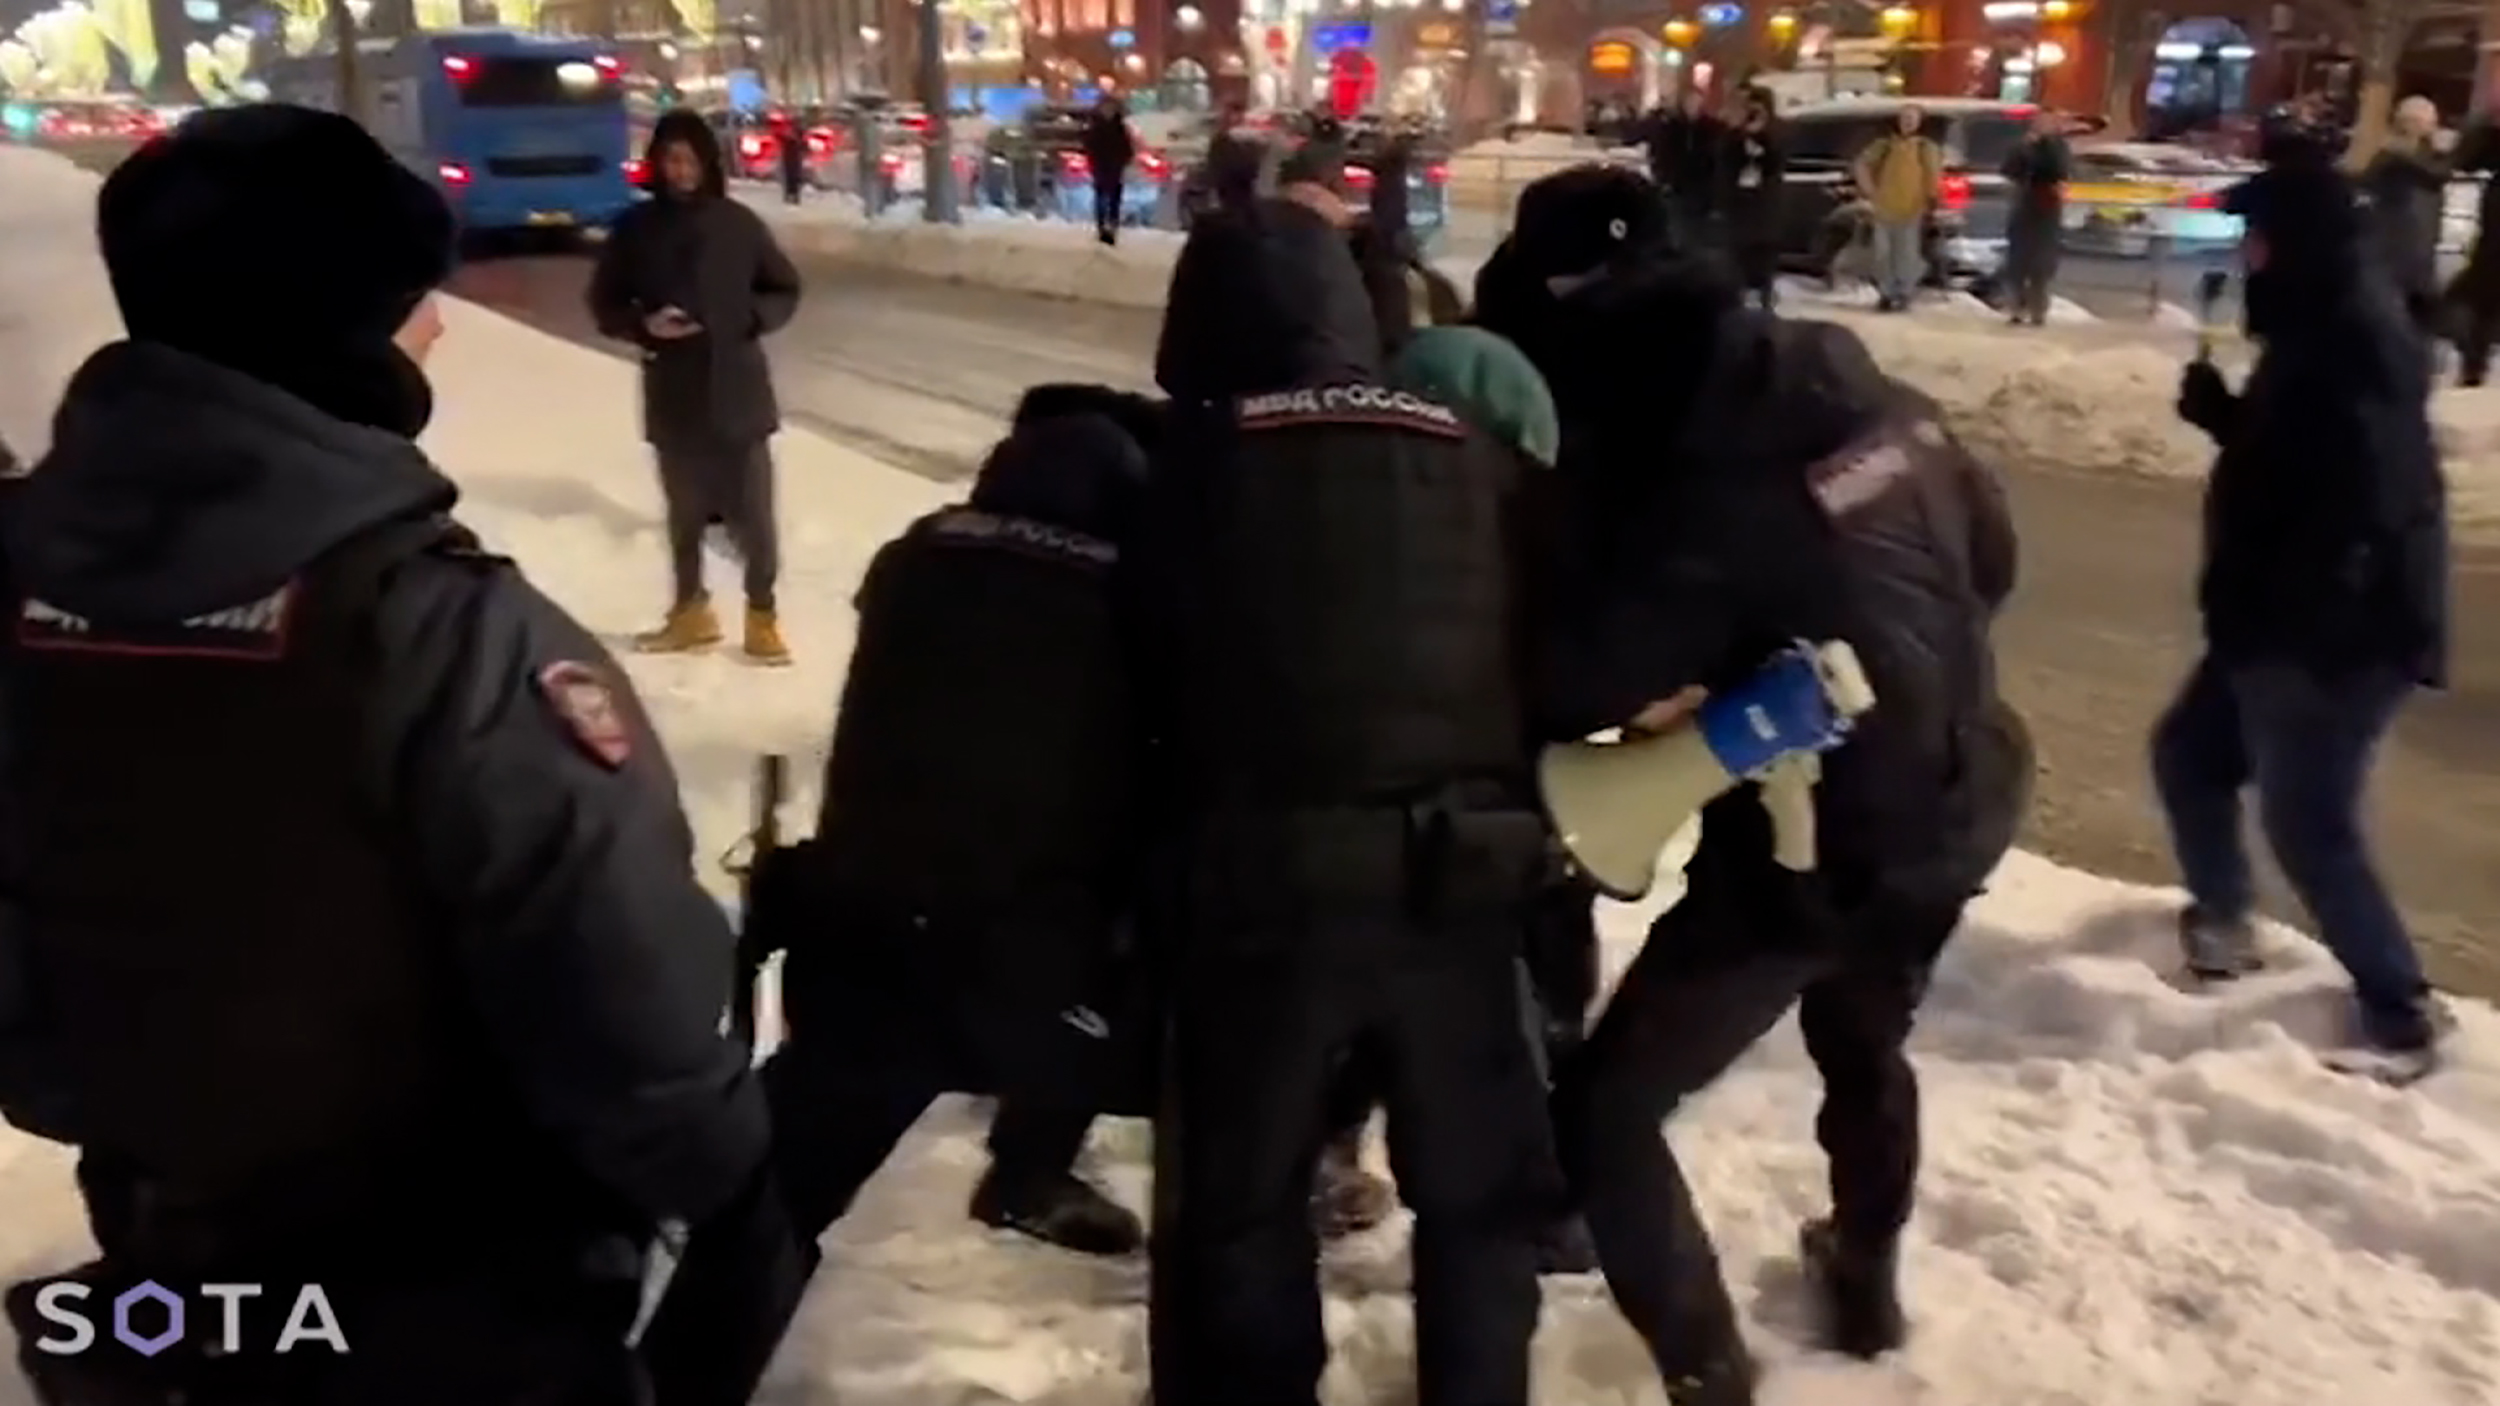 A frame from video from independent Russian news outlet SOTA, shows hows a skirmish between police and a protester in Moscow on Fridday, February 16.